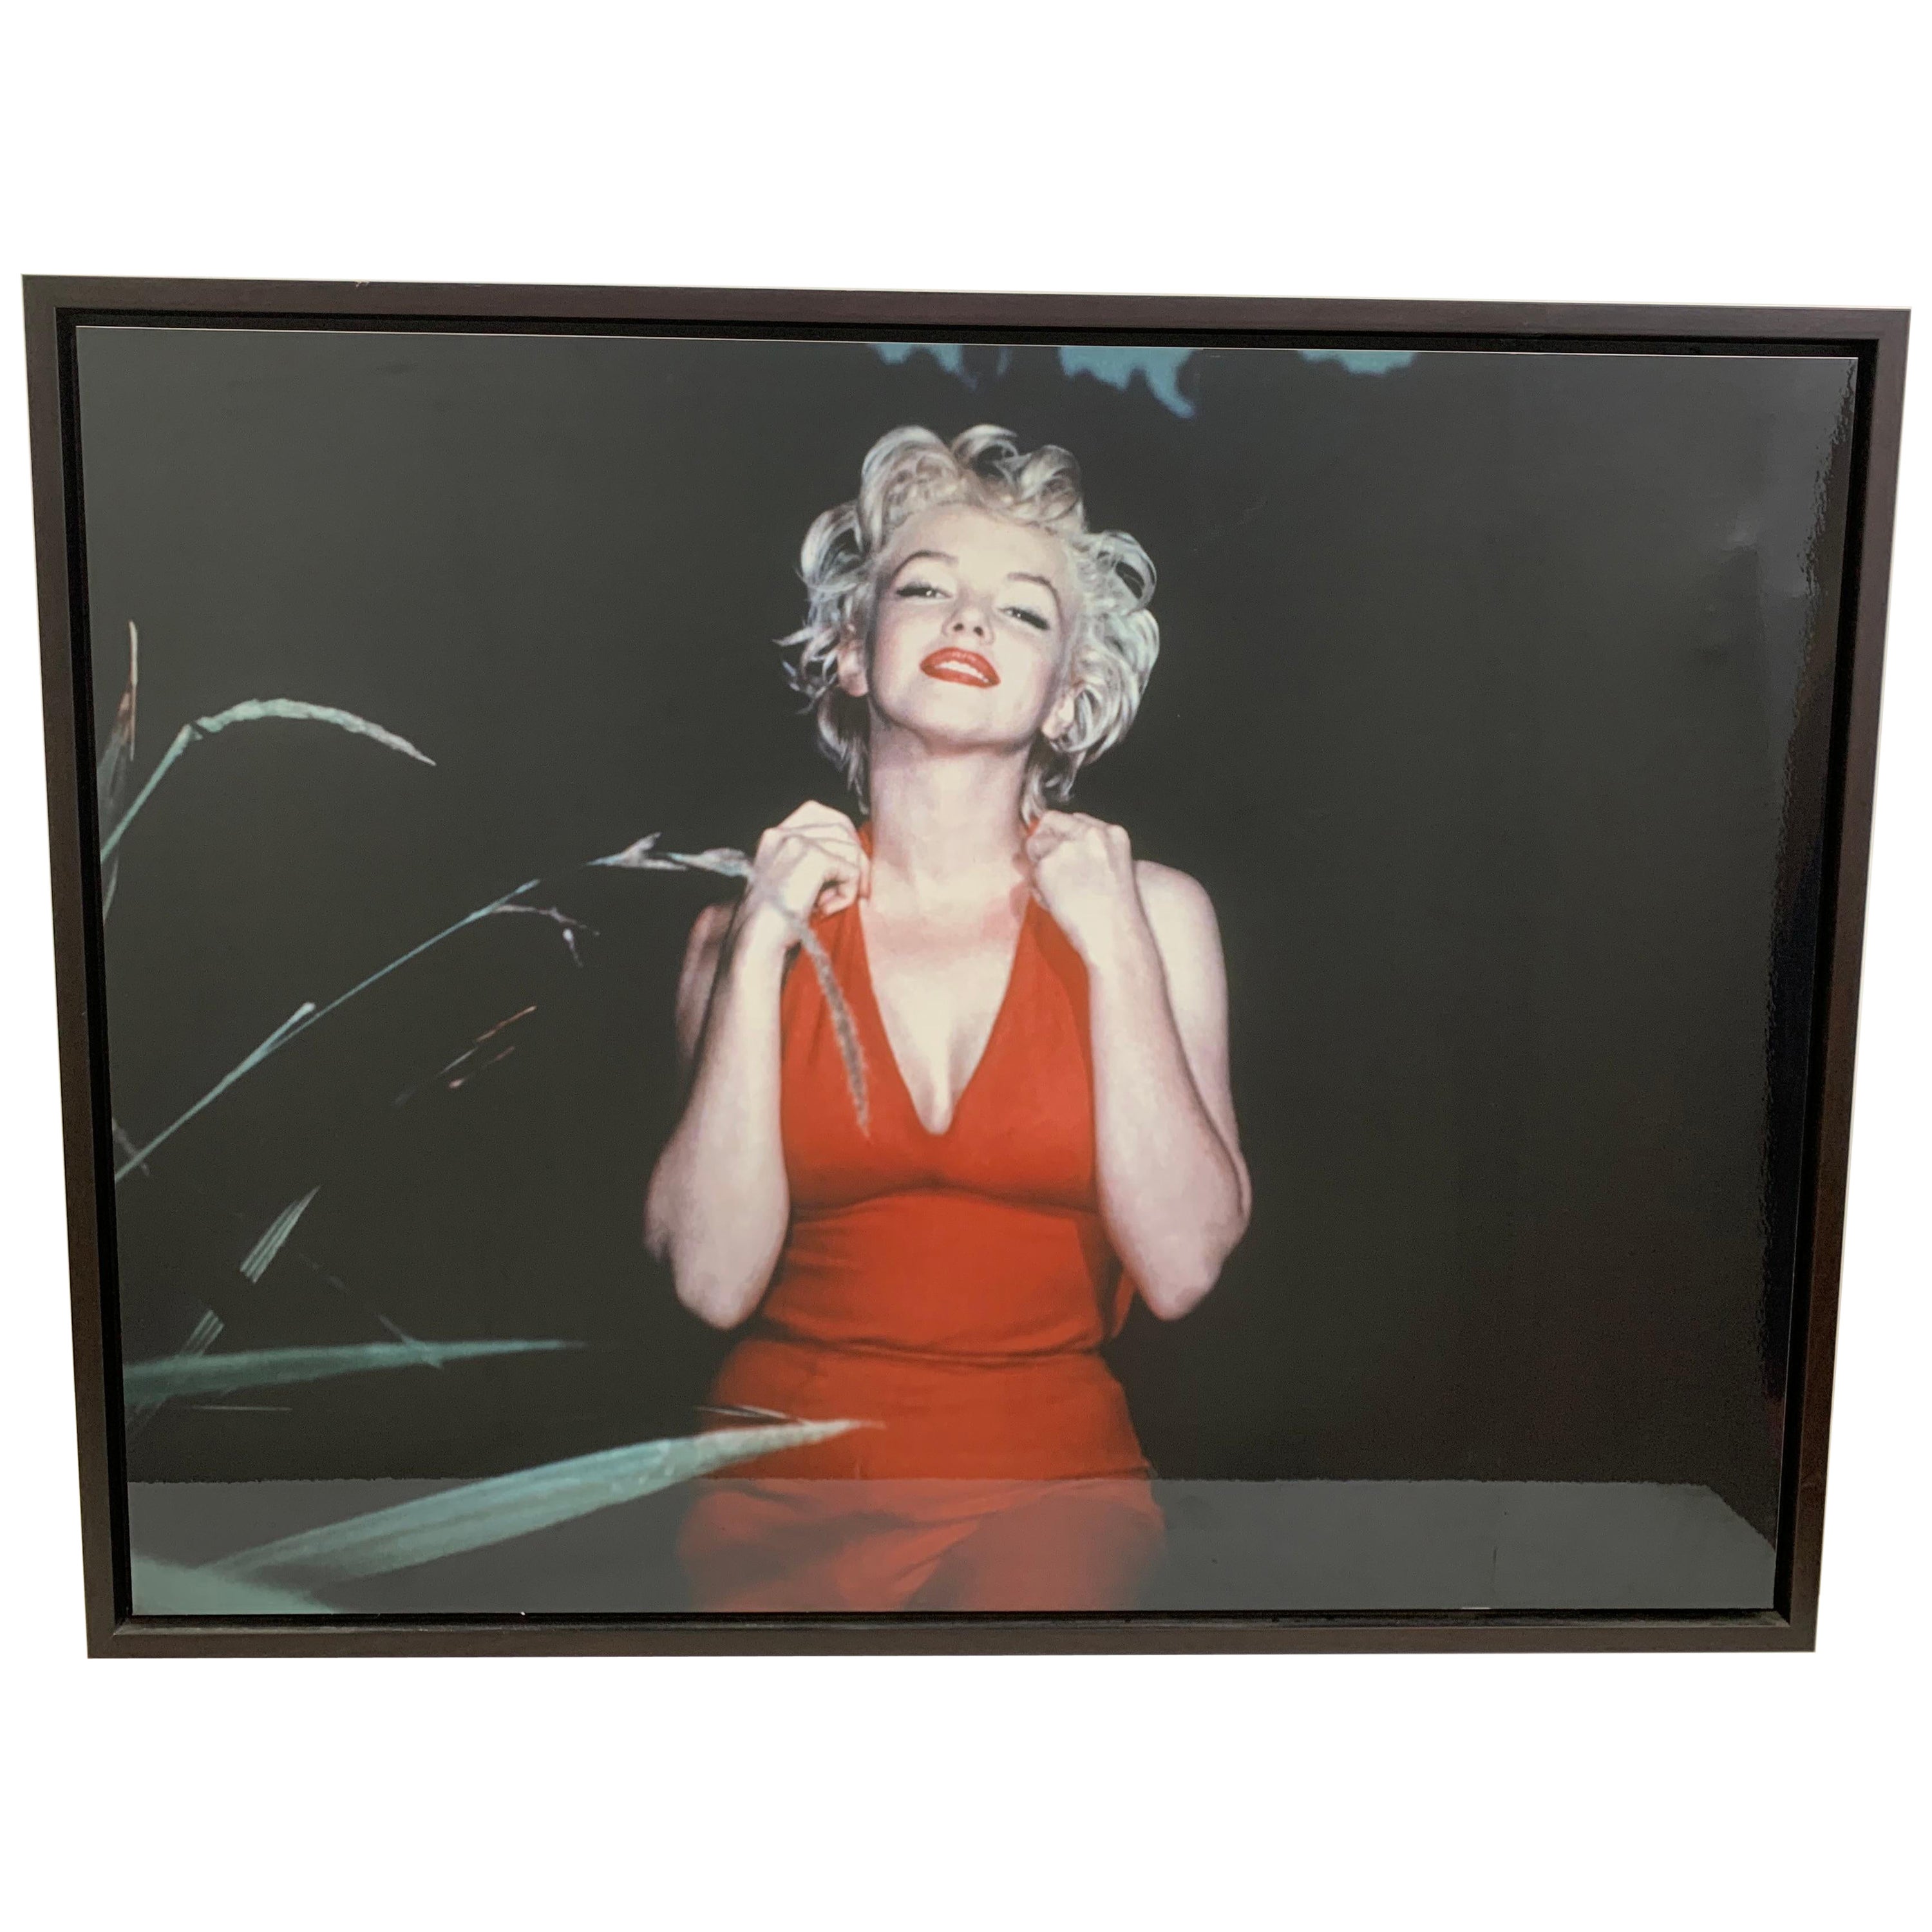 Marilyn Monroe Framed Print by Baron with Lumas - Certificate of Authenticity  For Sale